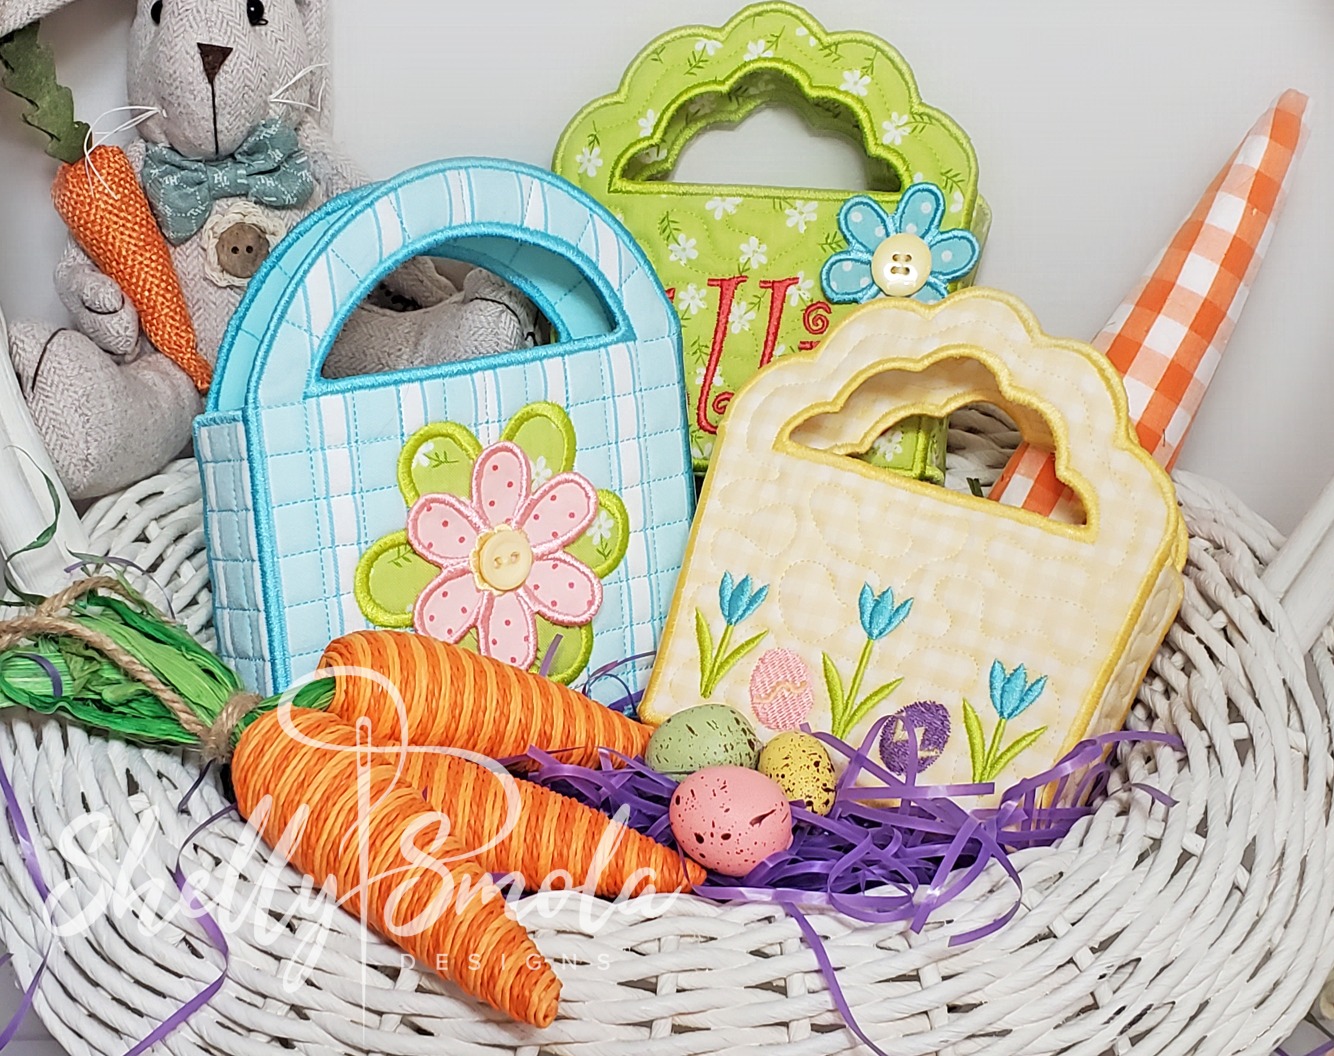 Easter Purses by Shelly Smola